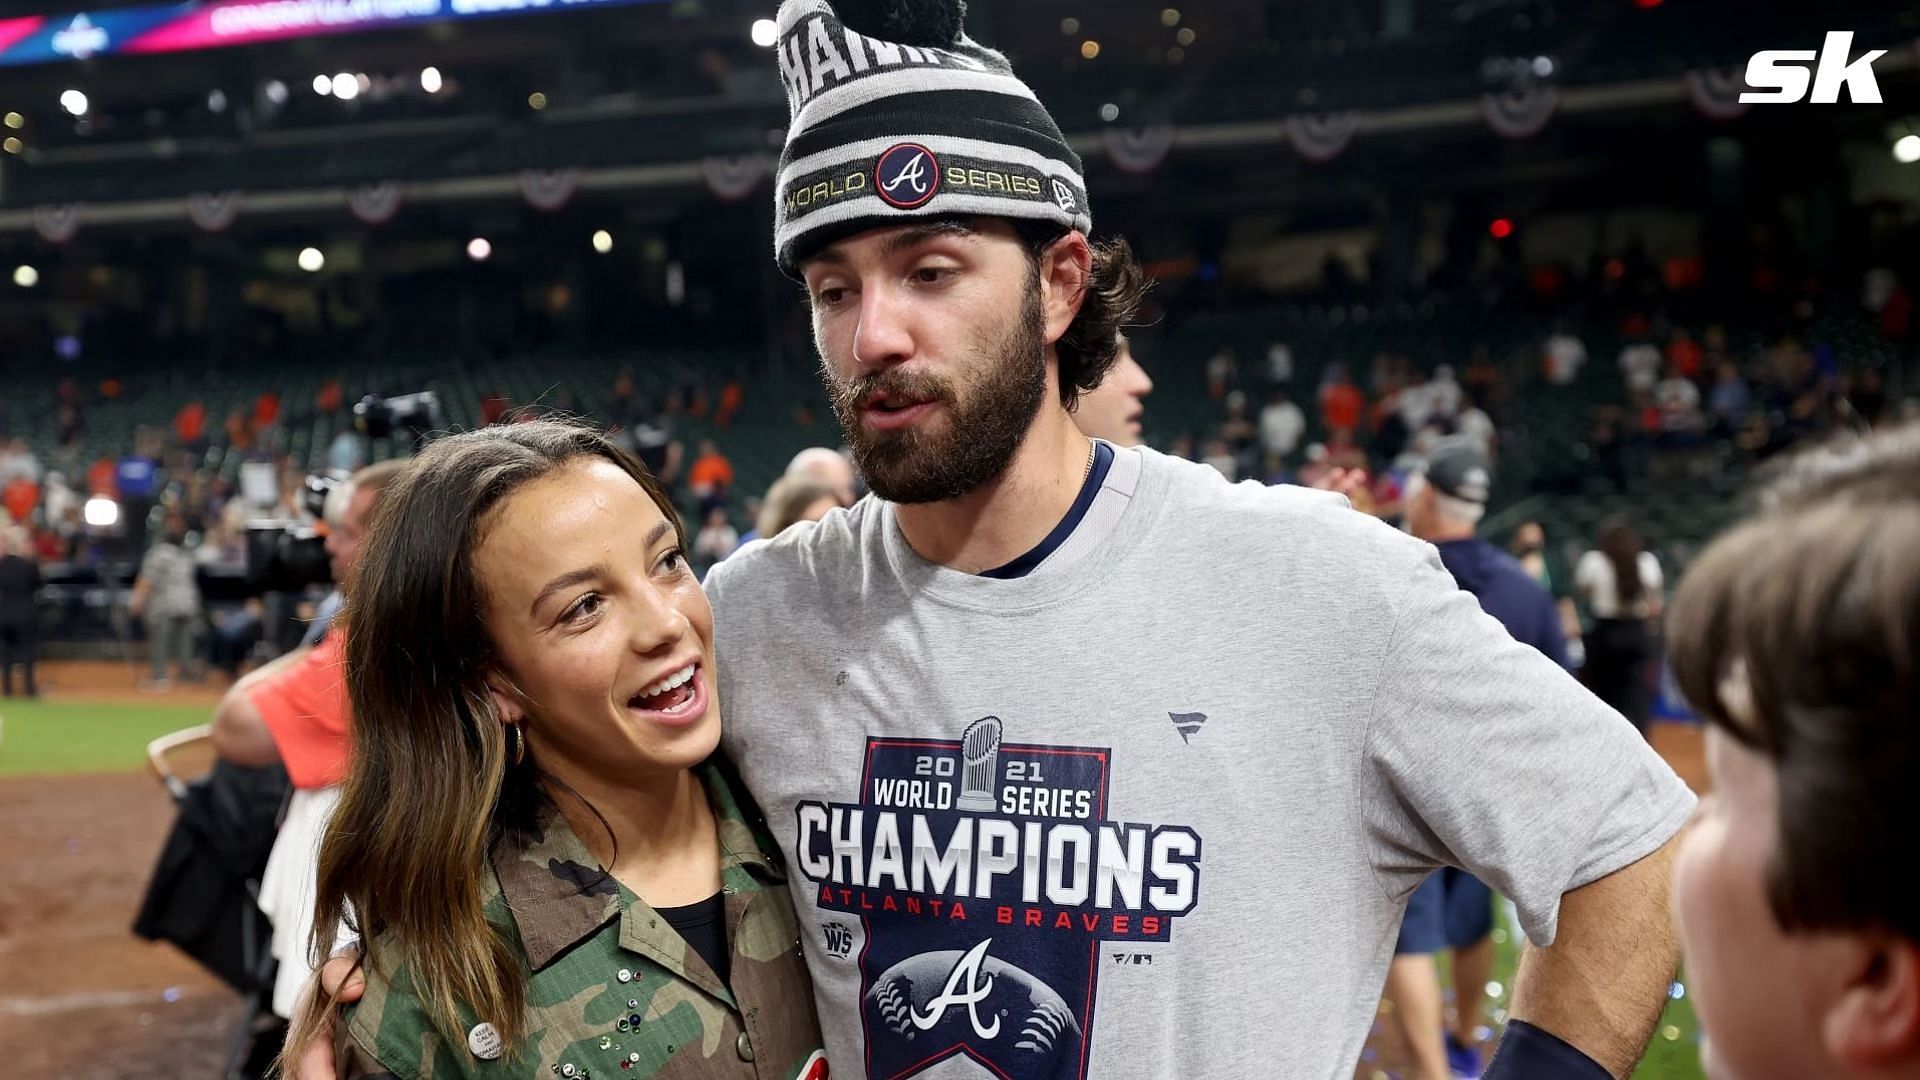 Dansby Swanson and Mallory Pugh on tying the knot before loved ones - “To  get married in front of our family and friends is so special